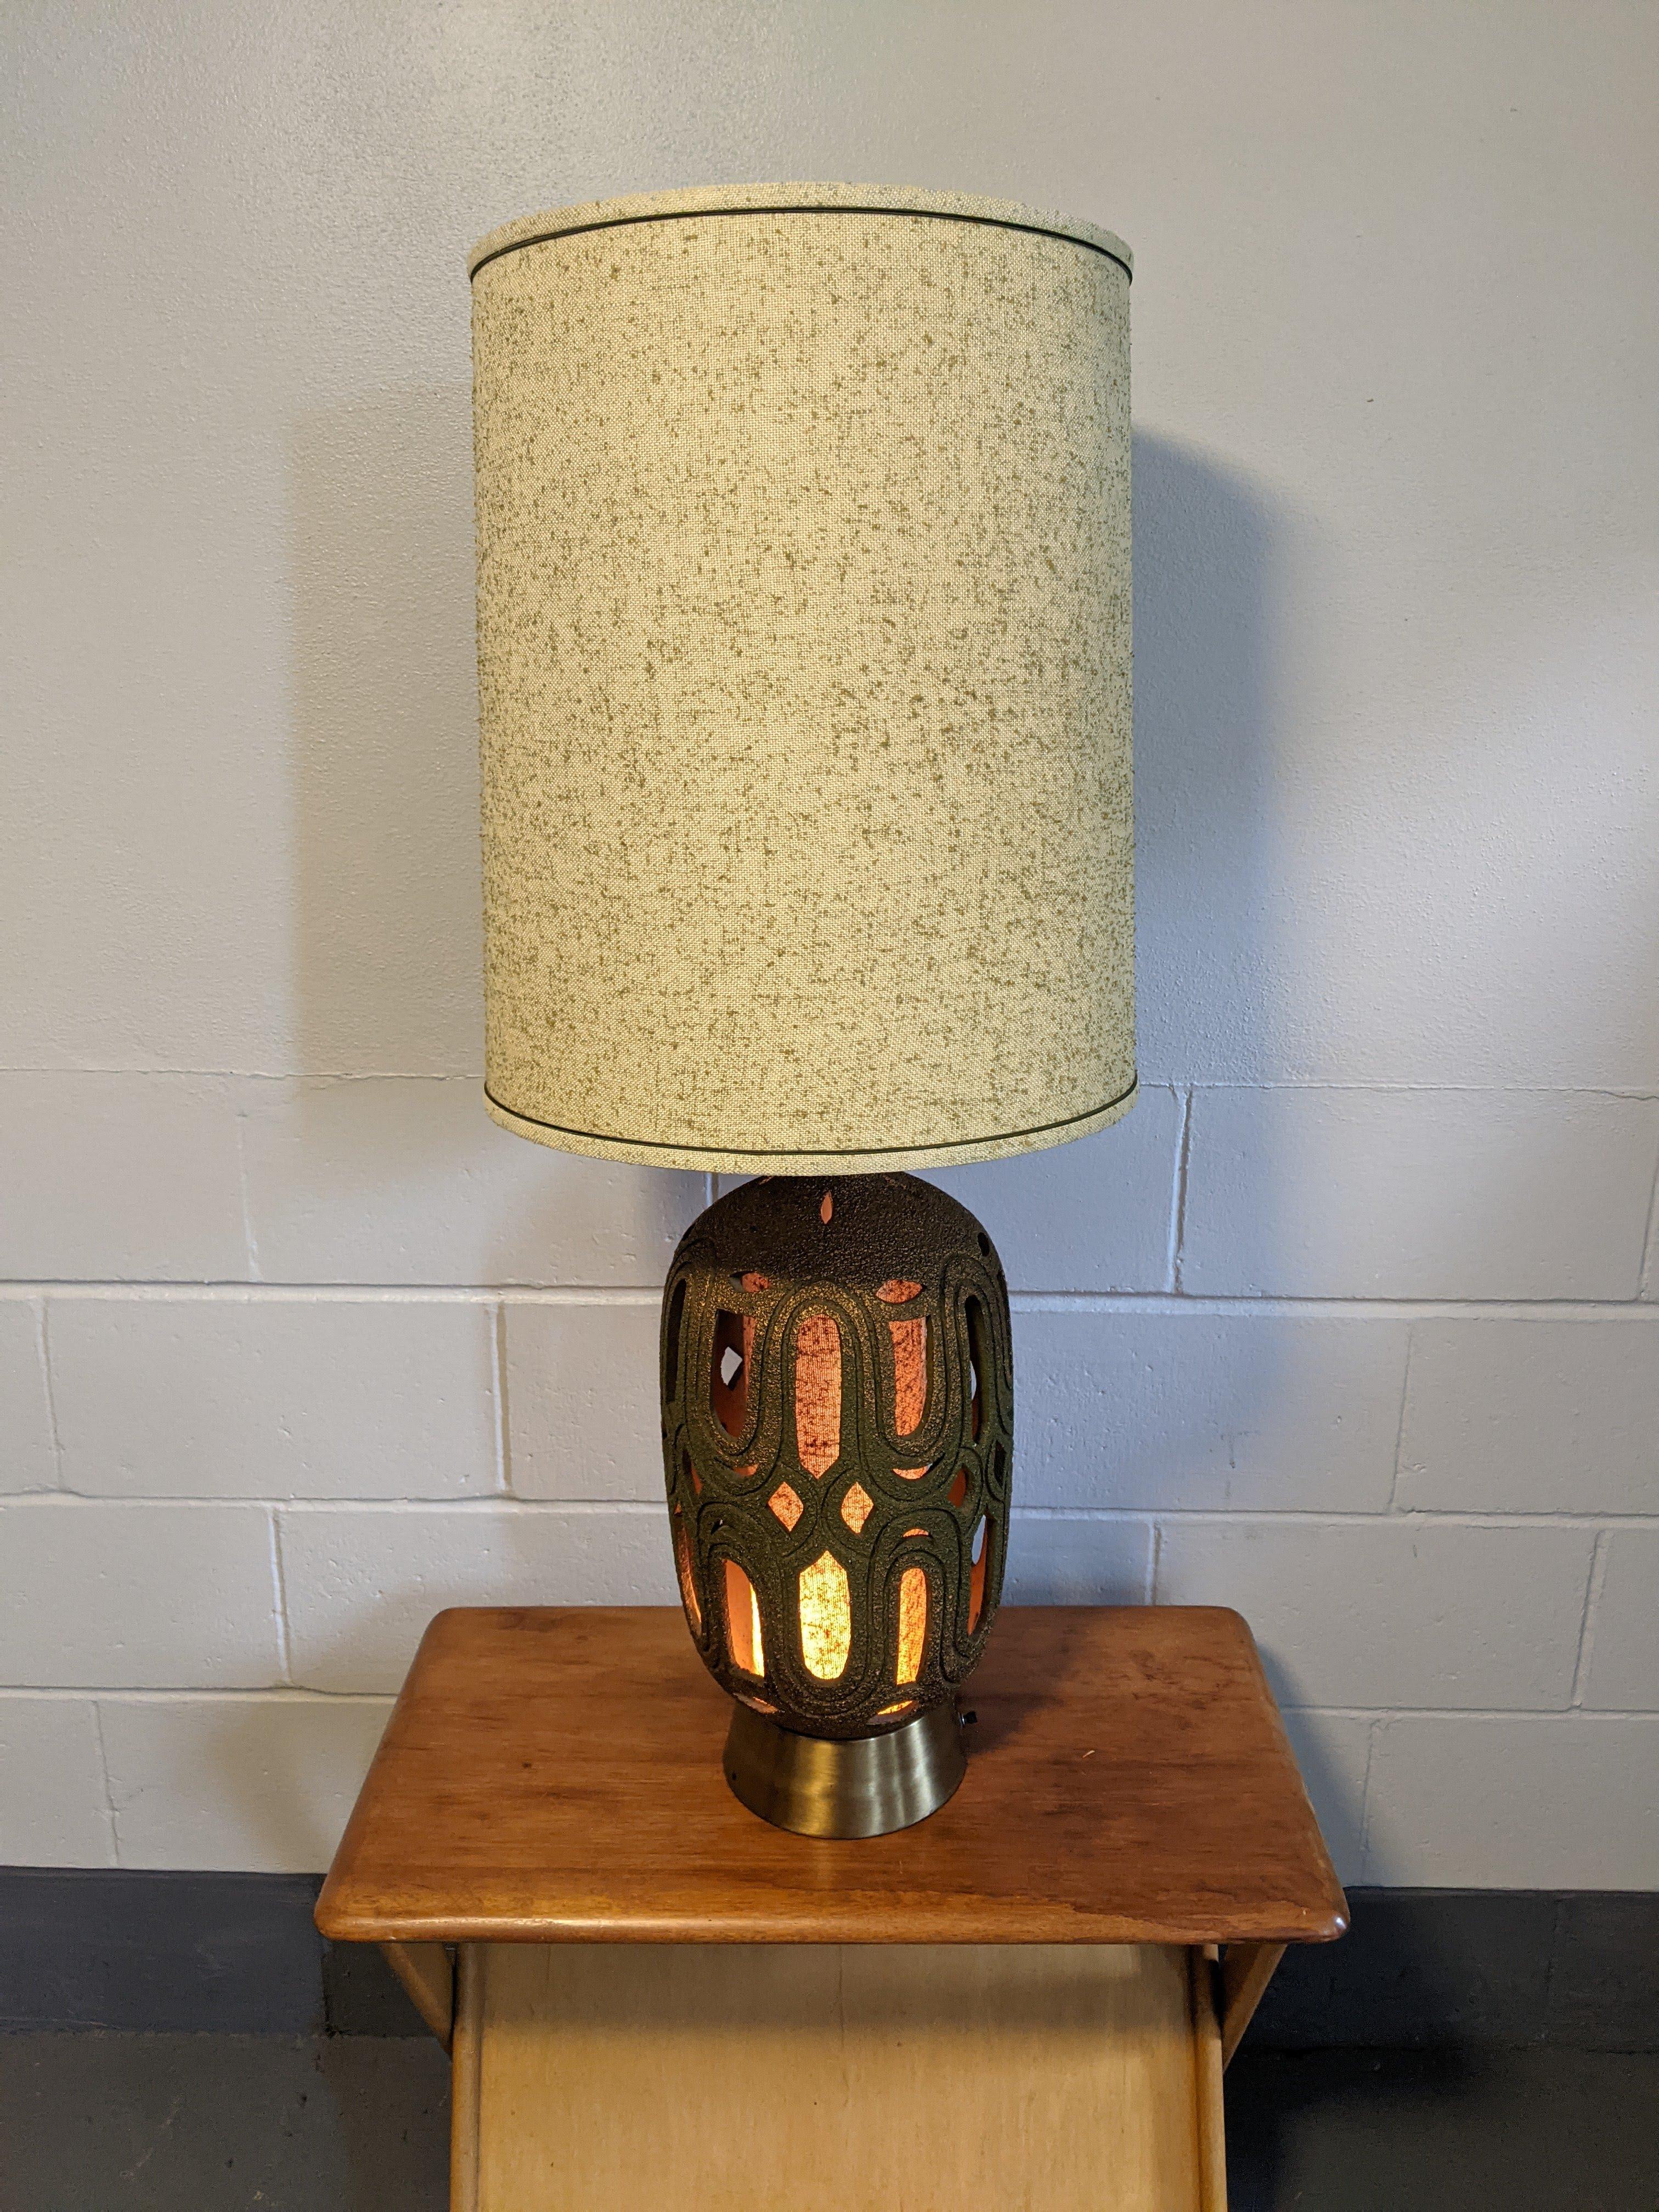 Large vintage Honi Chilo lamp with original shade, circa 1970s.

Gold or brass colored base, textured. Switches on base and neck, inside of base lights up with fabric to match the shade.

Good vintage condition. Very large vintage lamp.

Dimensions